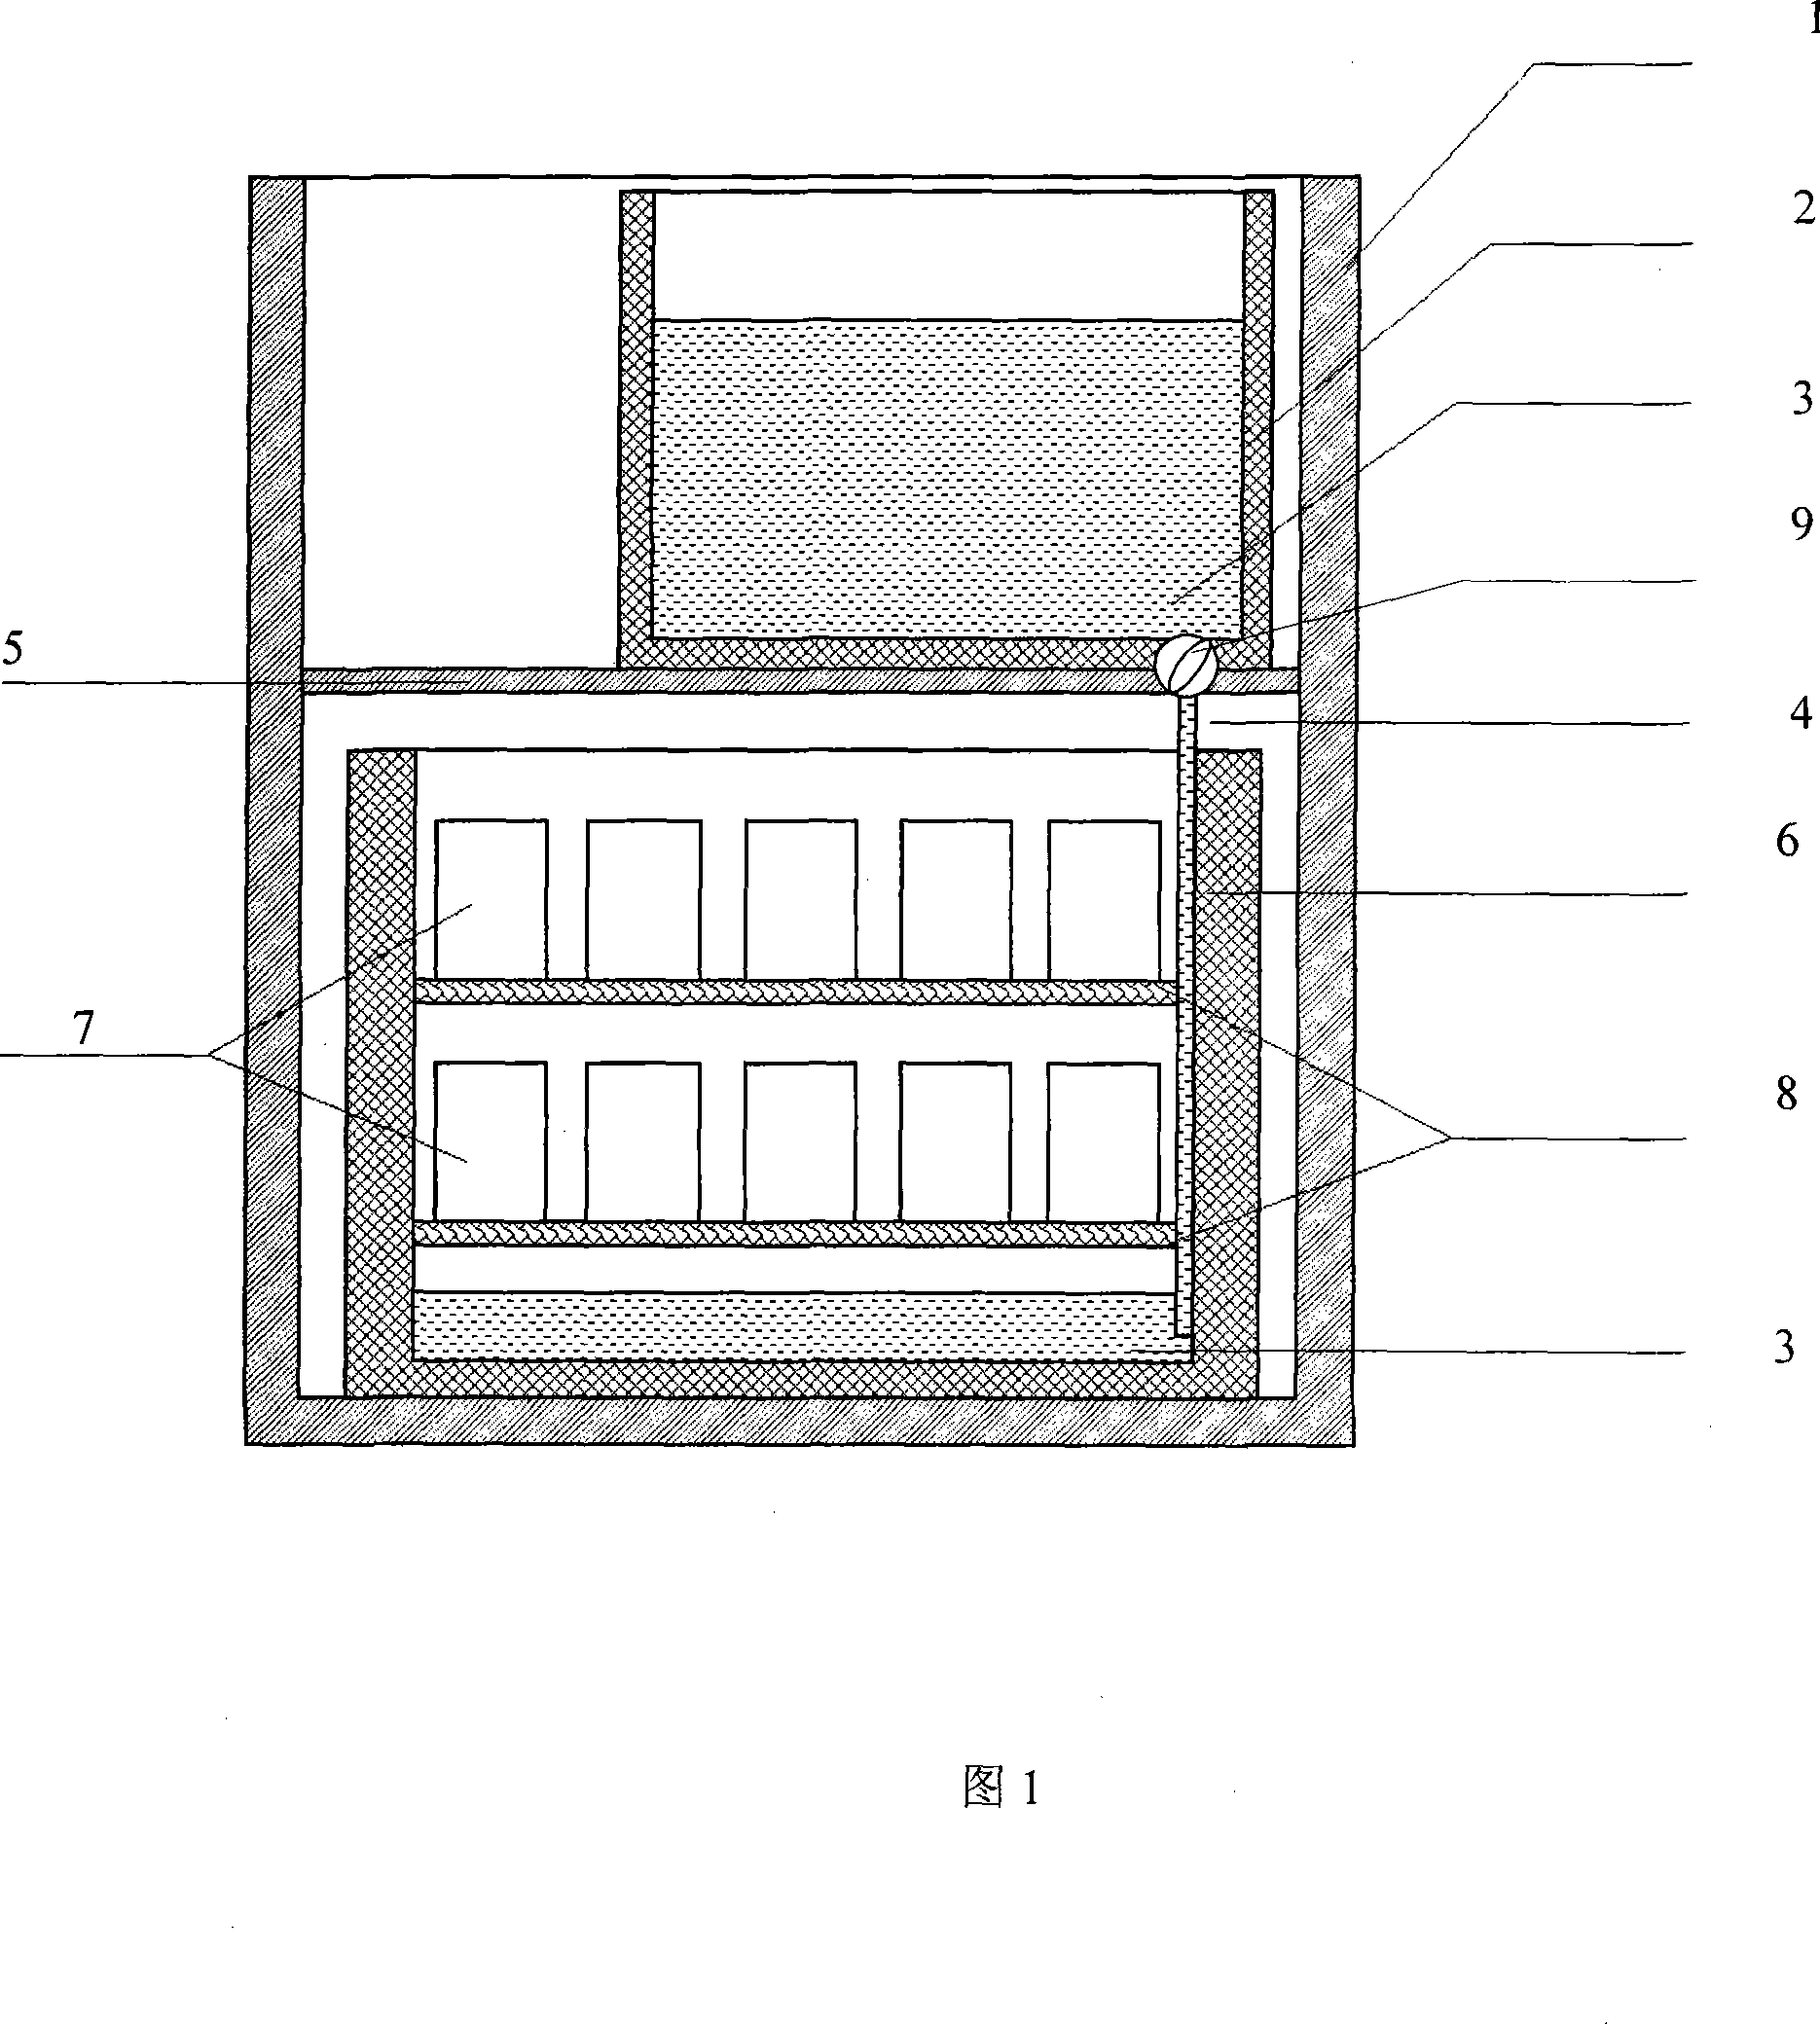 Impregnation forming method for capacitor core assembly